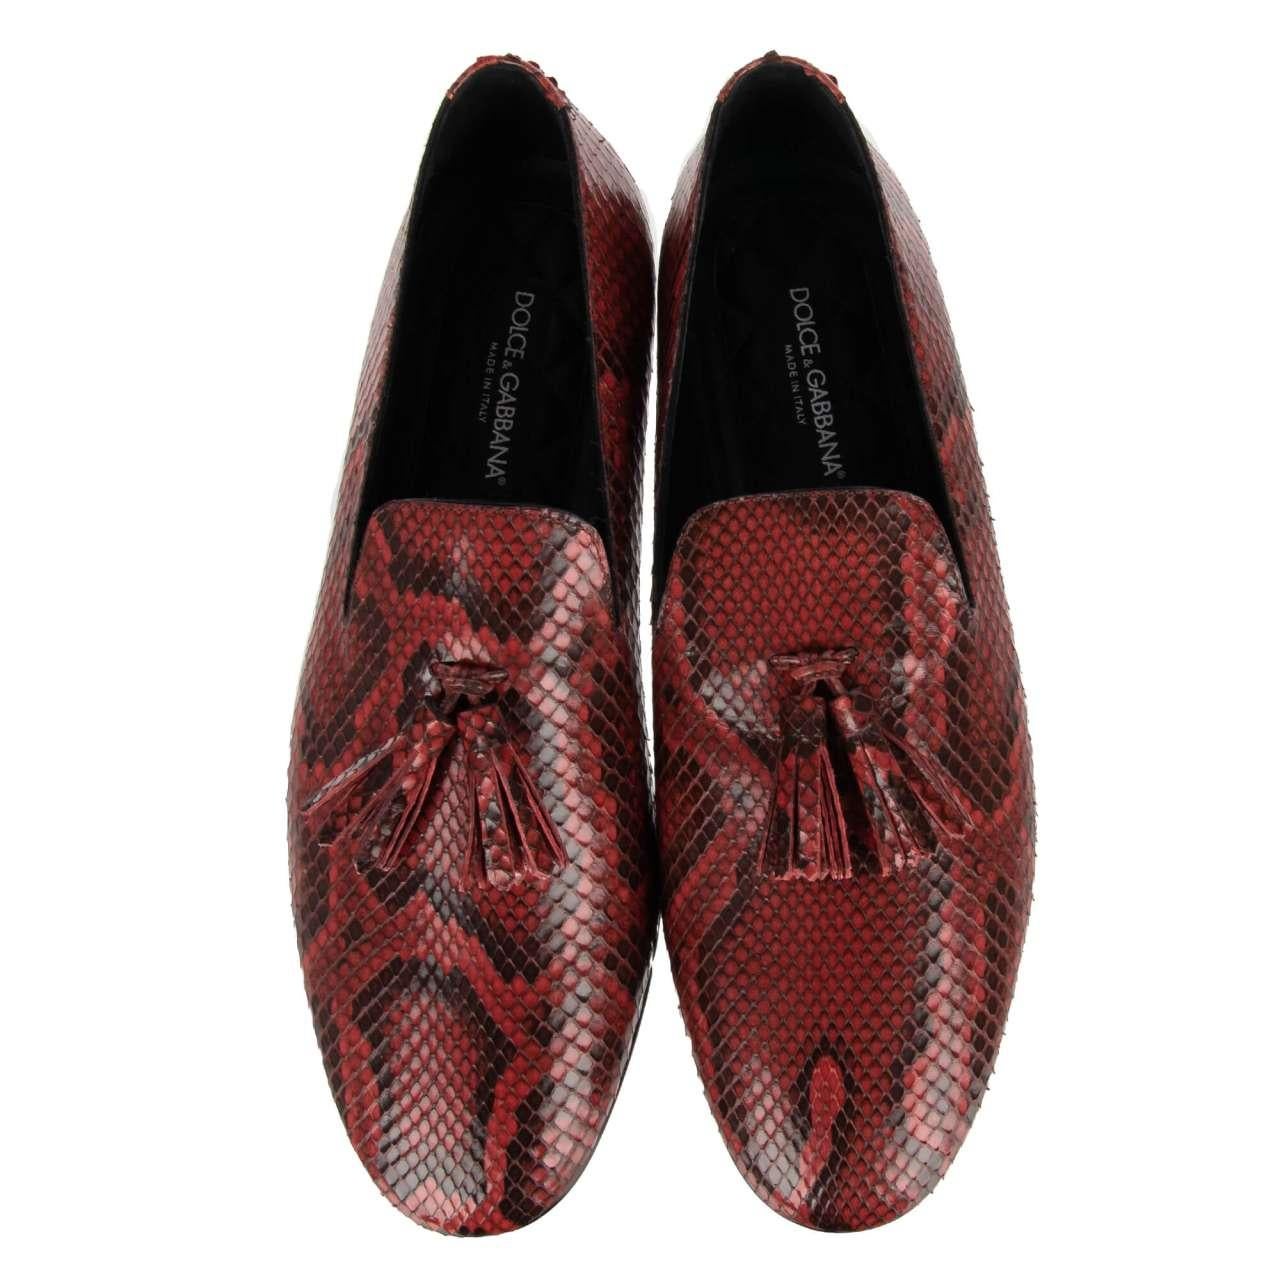 Dolce & Gabbana Snake Tassel Shoes Loafer YOUNG POPE Red 44 UK 10 US 11 For Sale 2